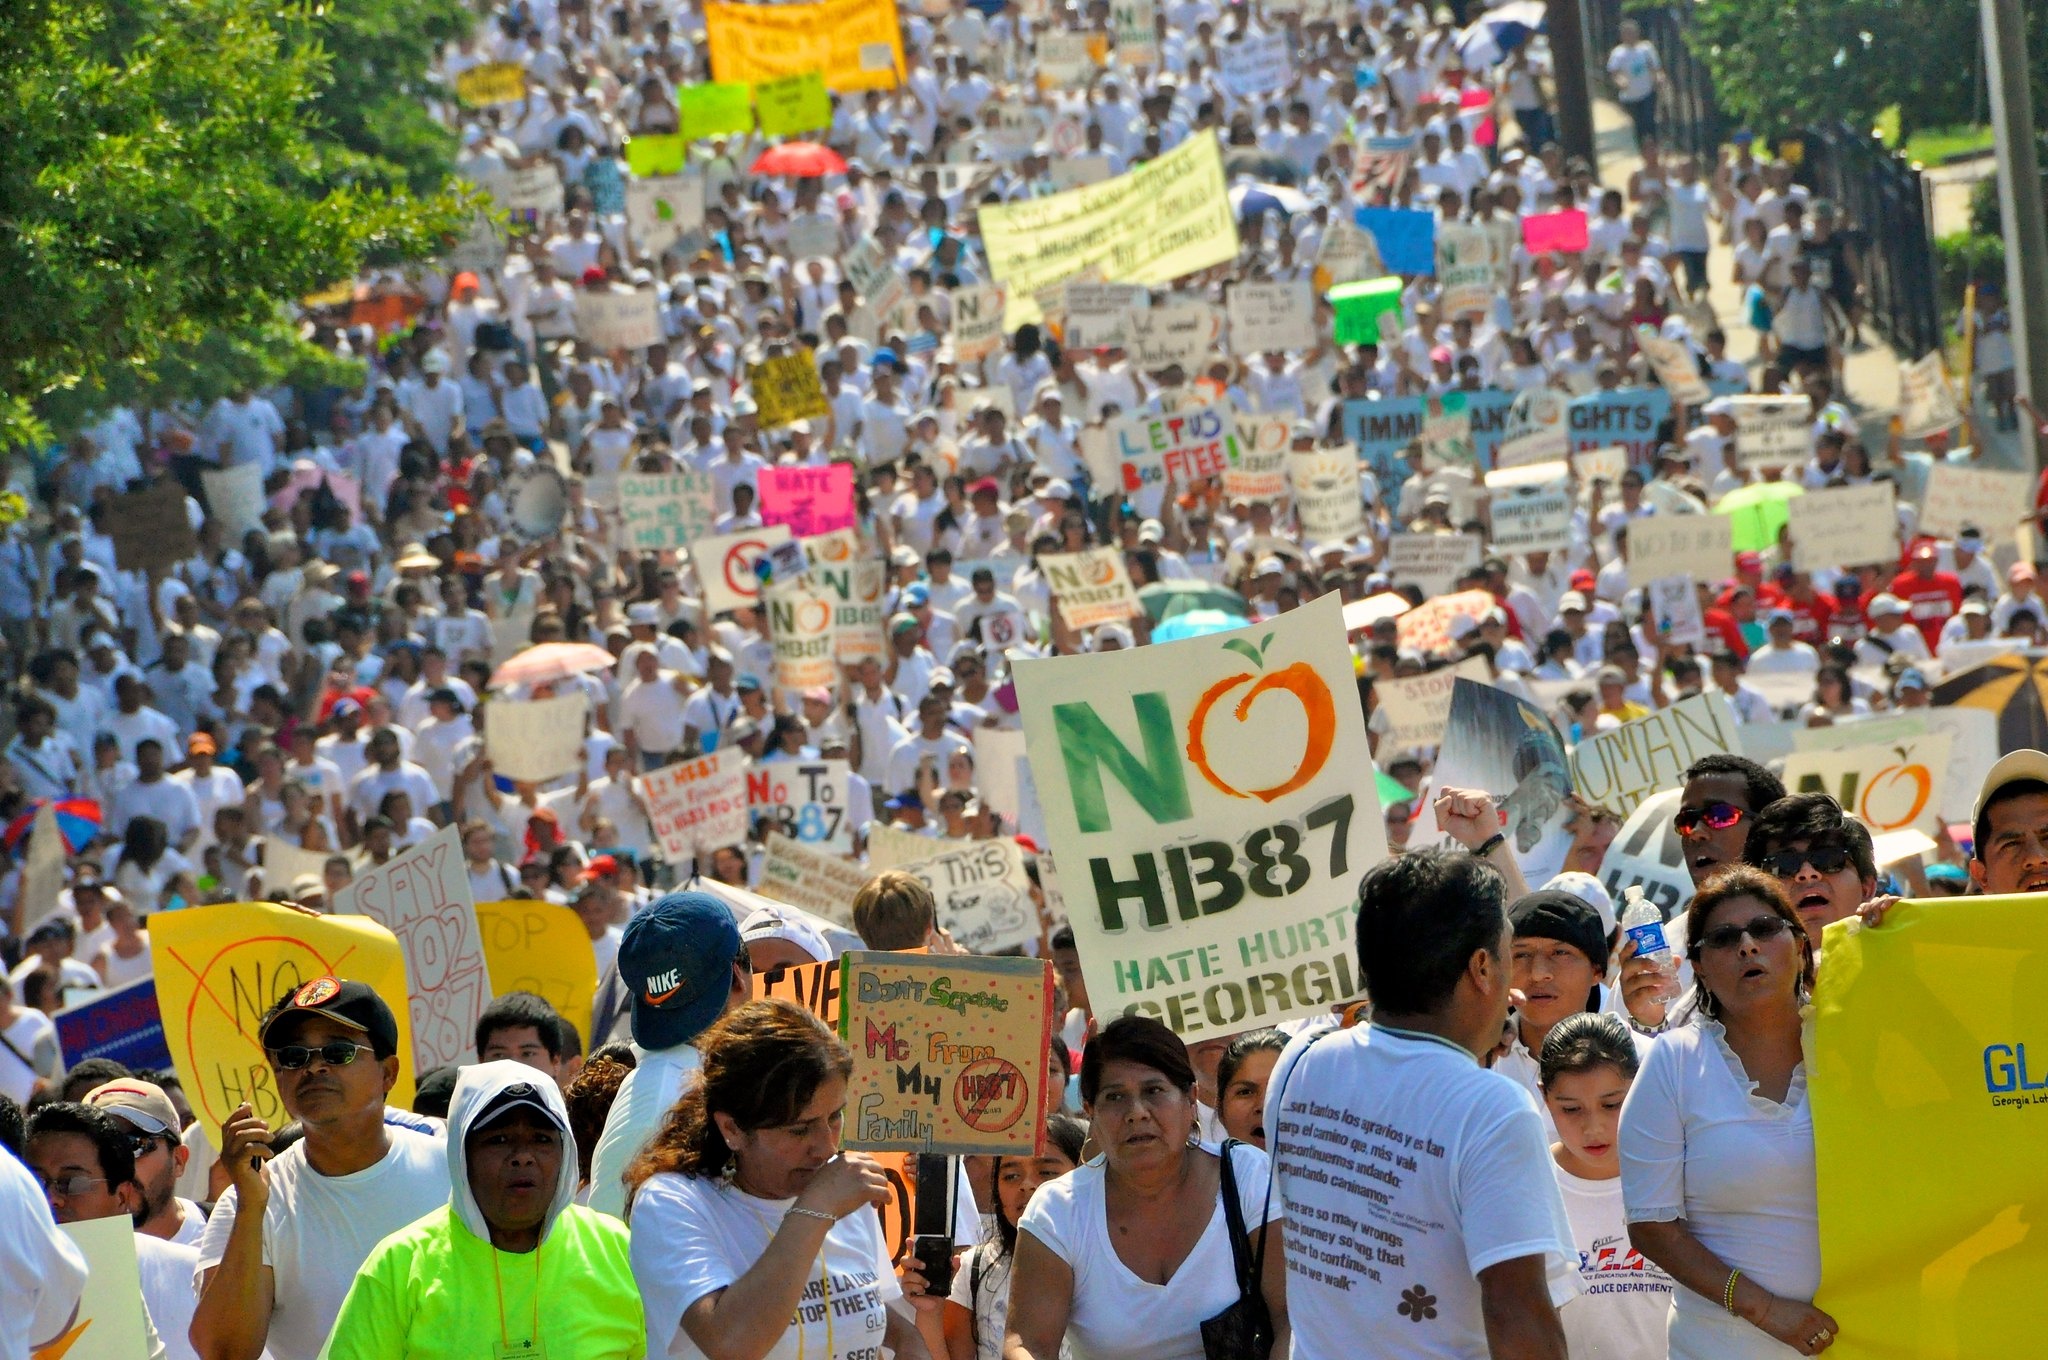 Image depicts a crowd of protesters carrying signs and marching in downtown Atlanta. In the foreground, a sign reading "No HB87, Hate Hurts Georgia" can be read.